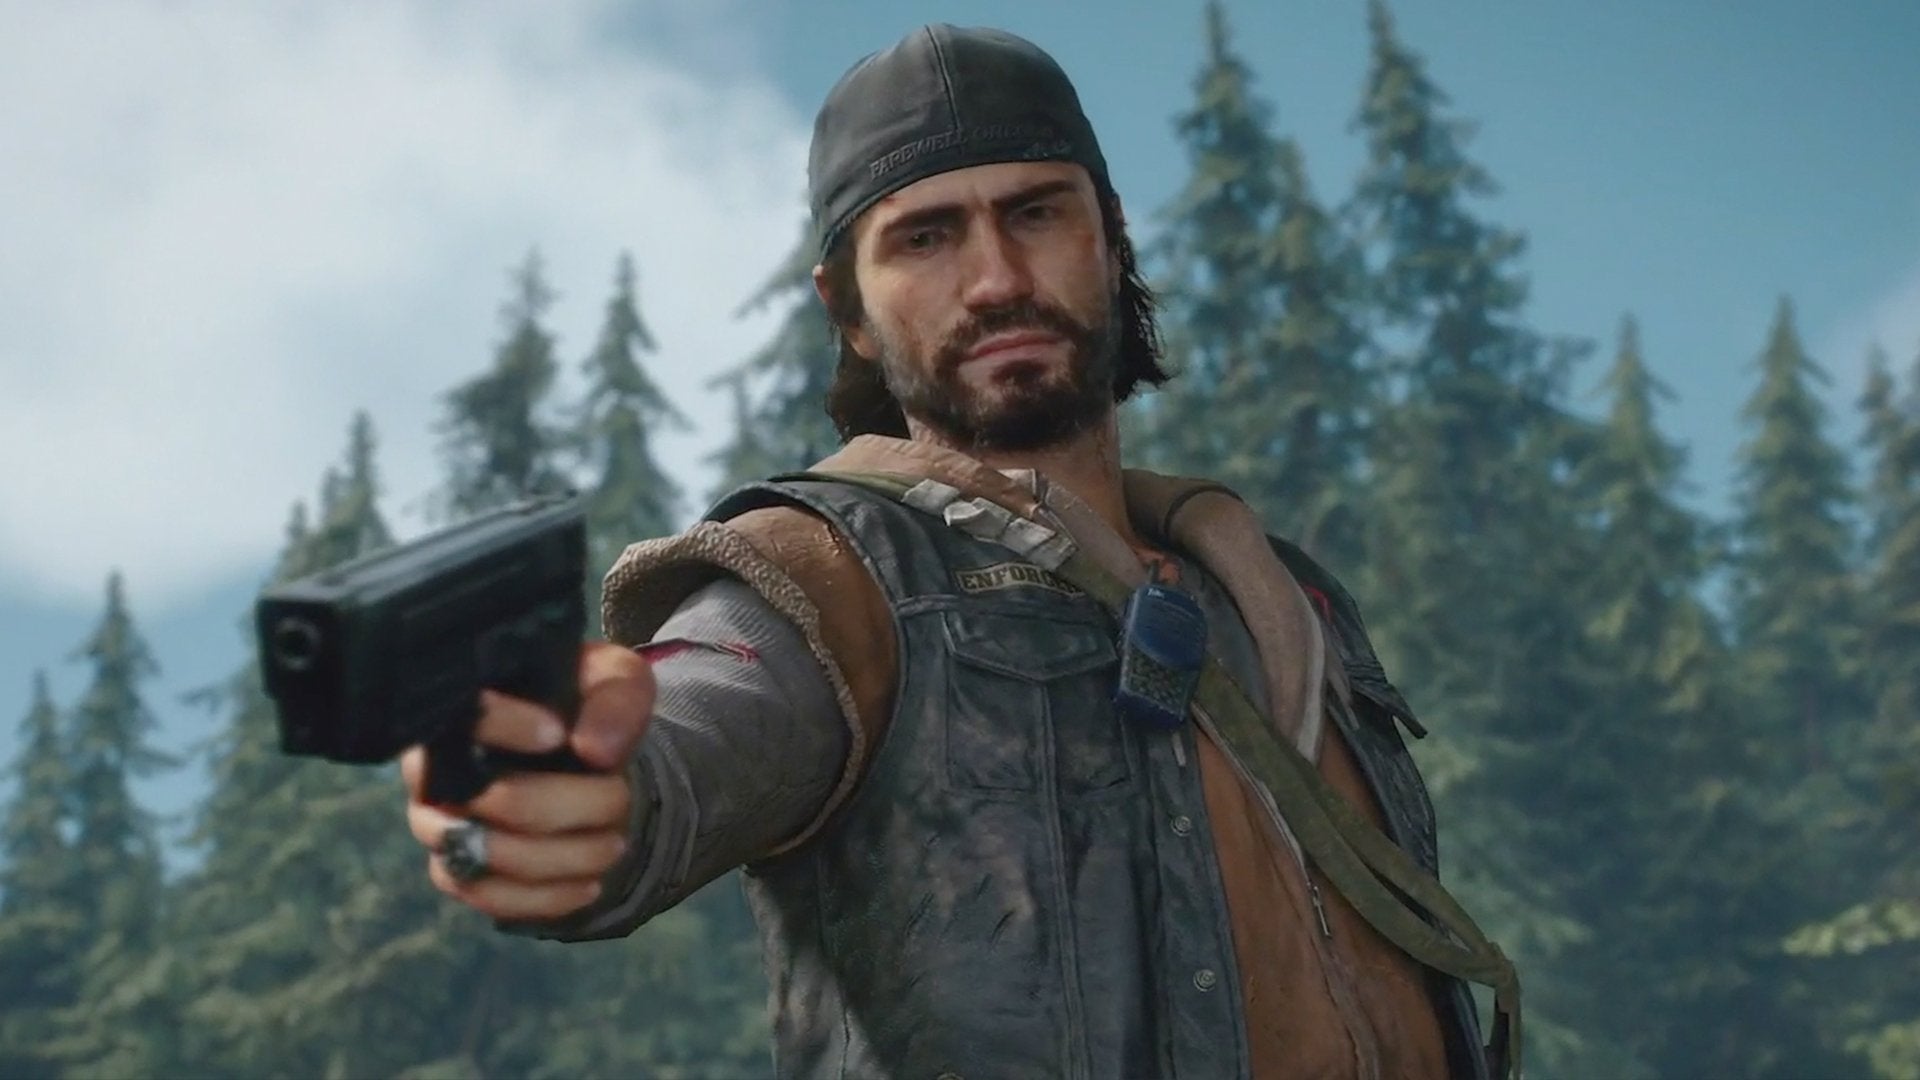 Image for Days Gone PC won't support DLSS or ray tracing